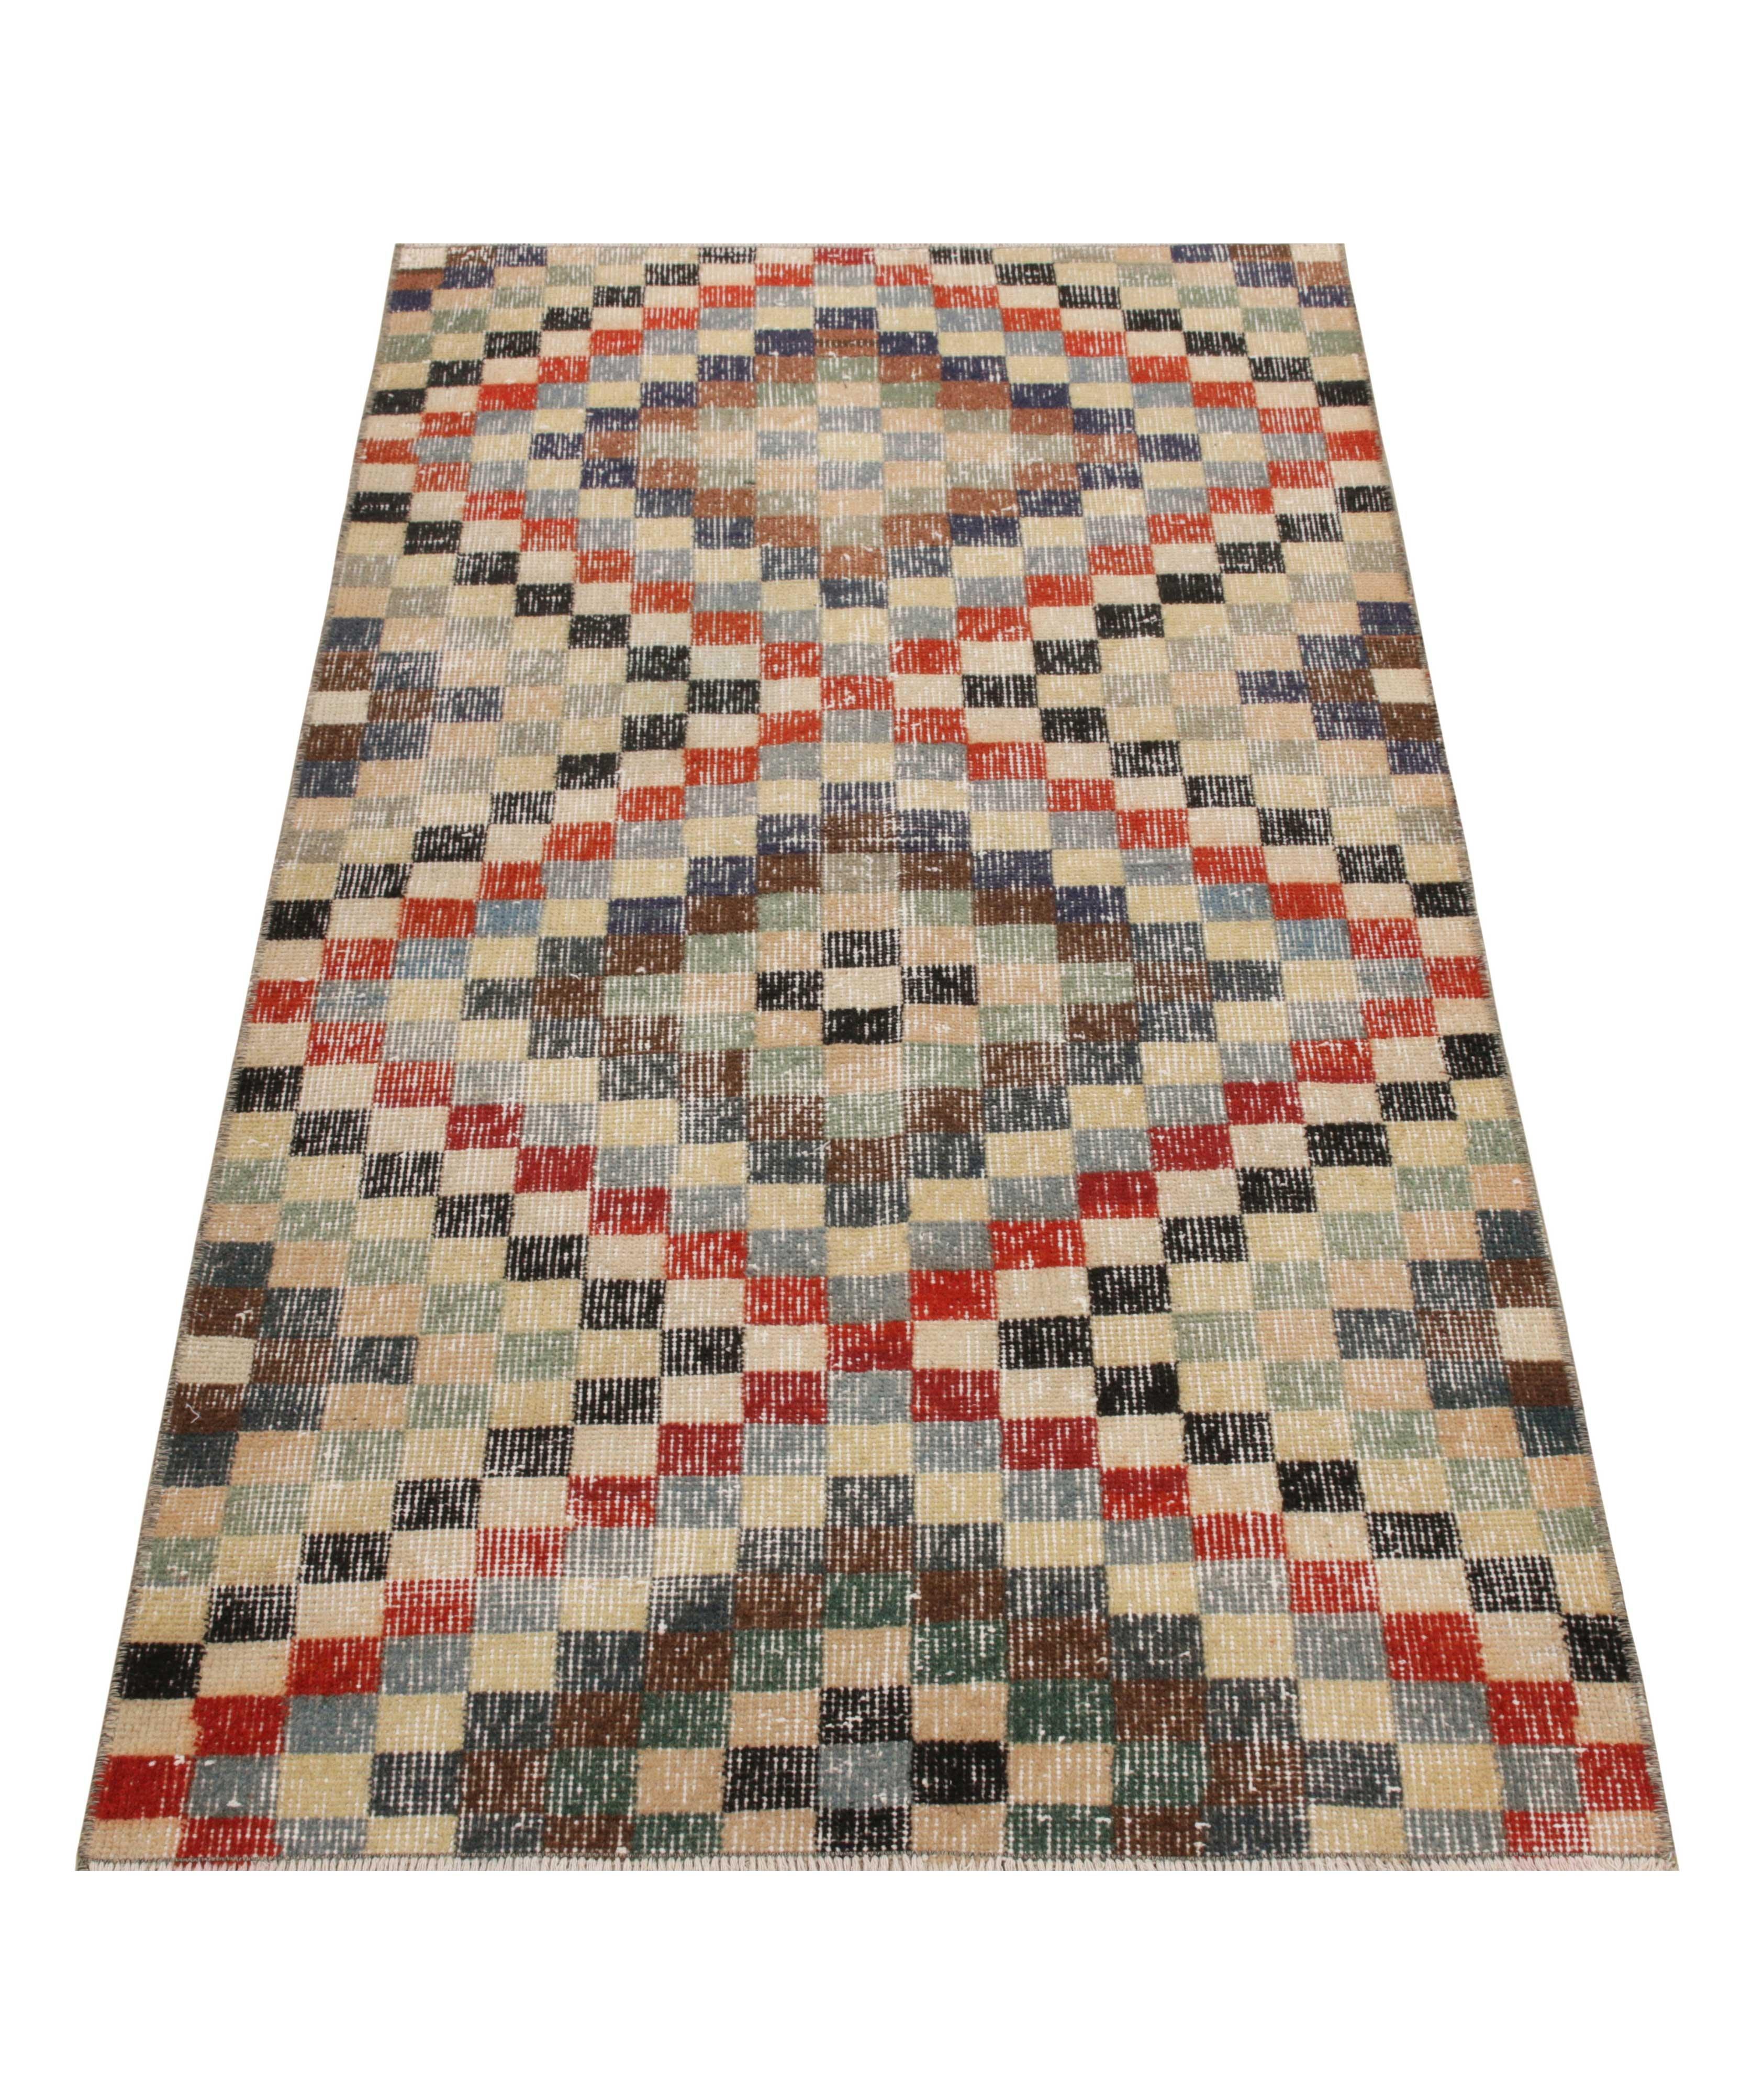 1960s Hand-Knotted Vintage Beige-Brown Geometric Rug image 0